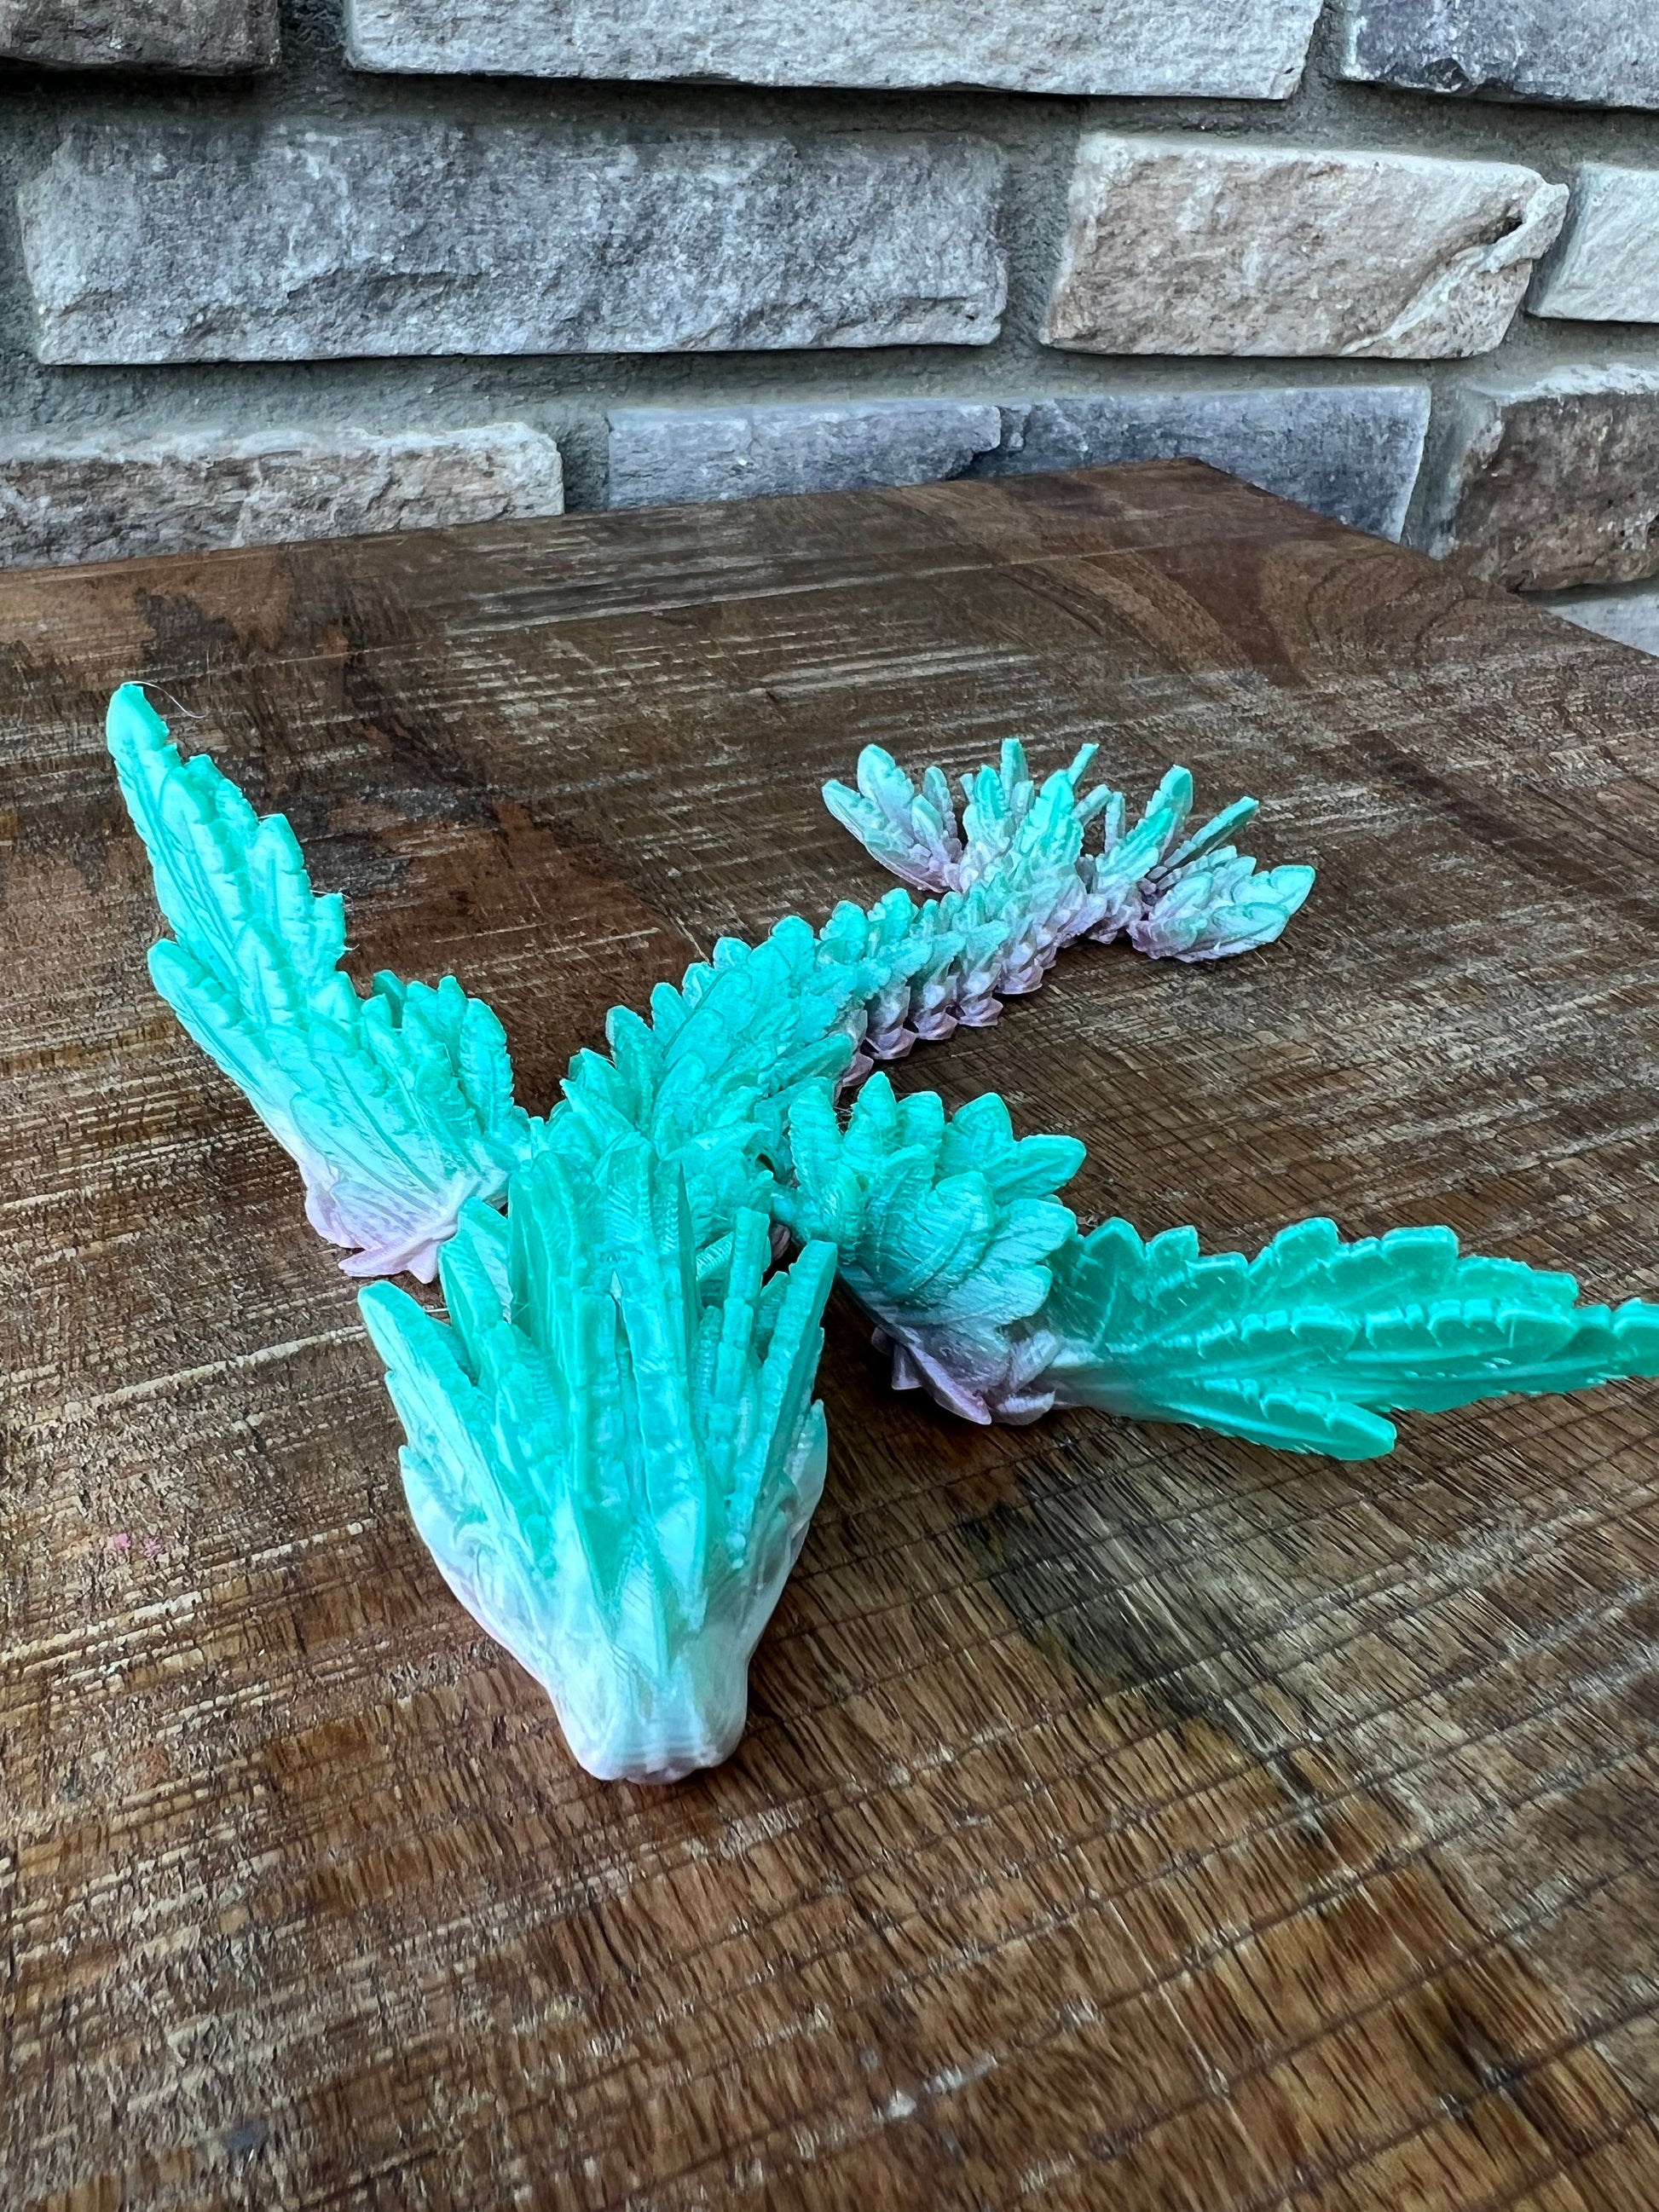 3D Printed Articulated Flexi Winged Flying Crystal Dragon Fidget